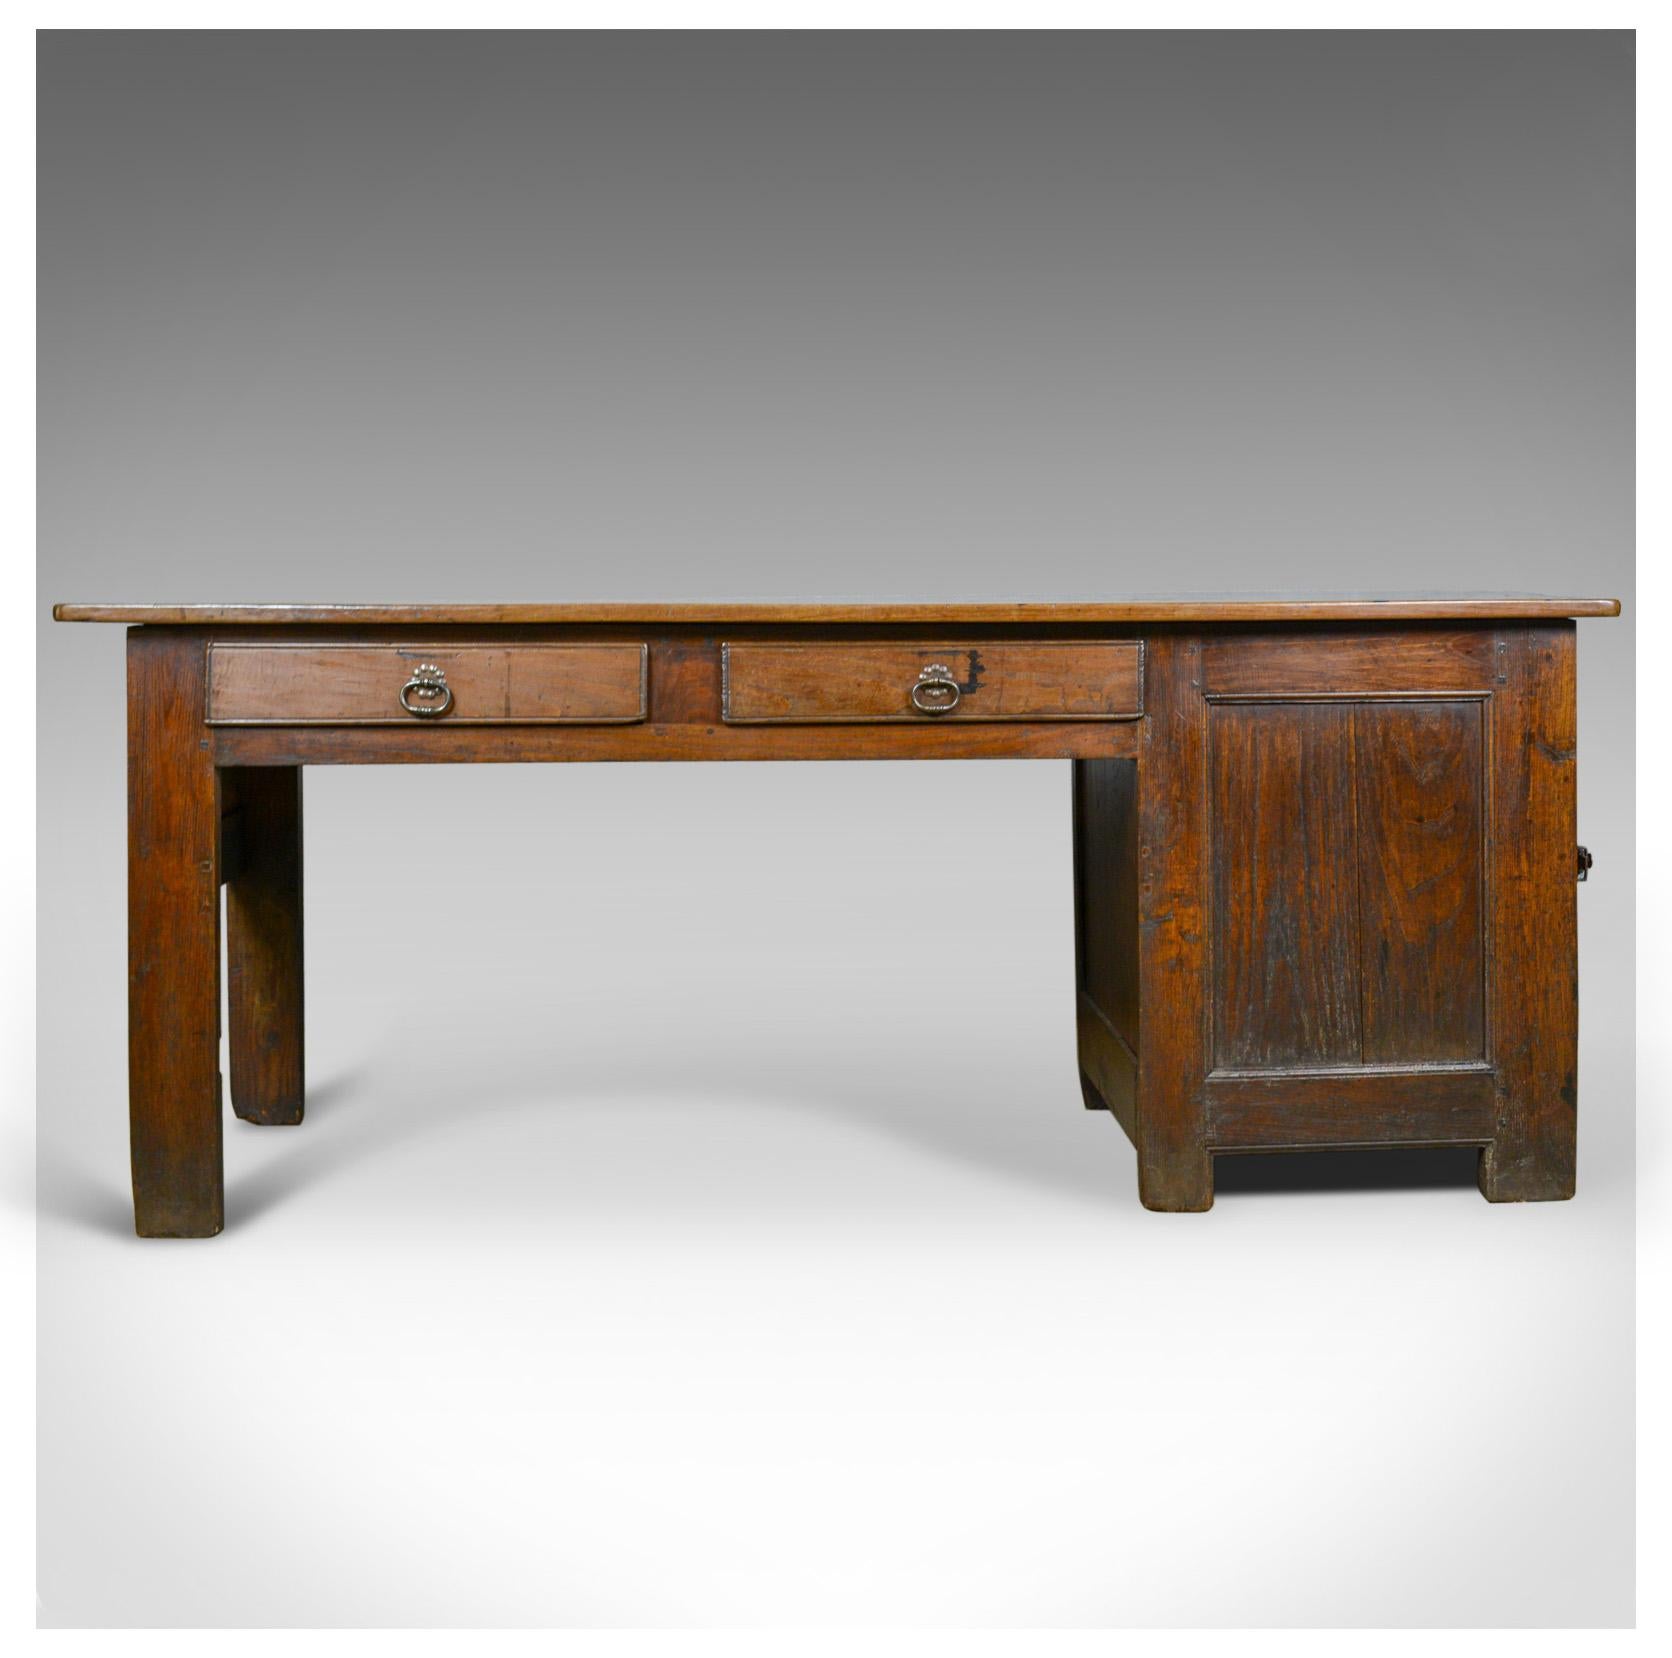 This is an antique French Mayoral clerk's desk. An oak and elm table dating to the mid-19th century, circa 1850.

A substantial and heavy French oak clerk's desk
The stout stocks of oak and elm displaying good color throughout
Of pegged